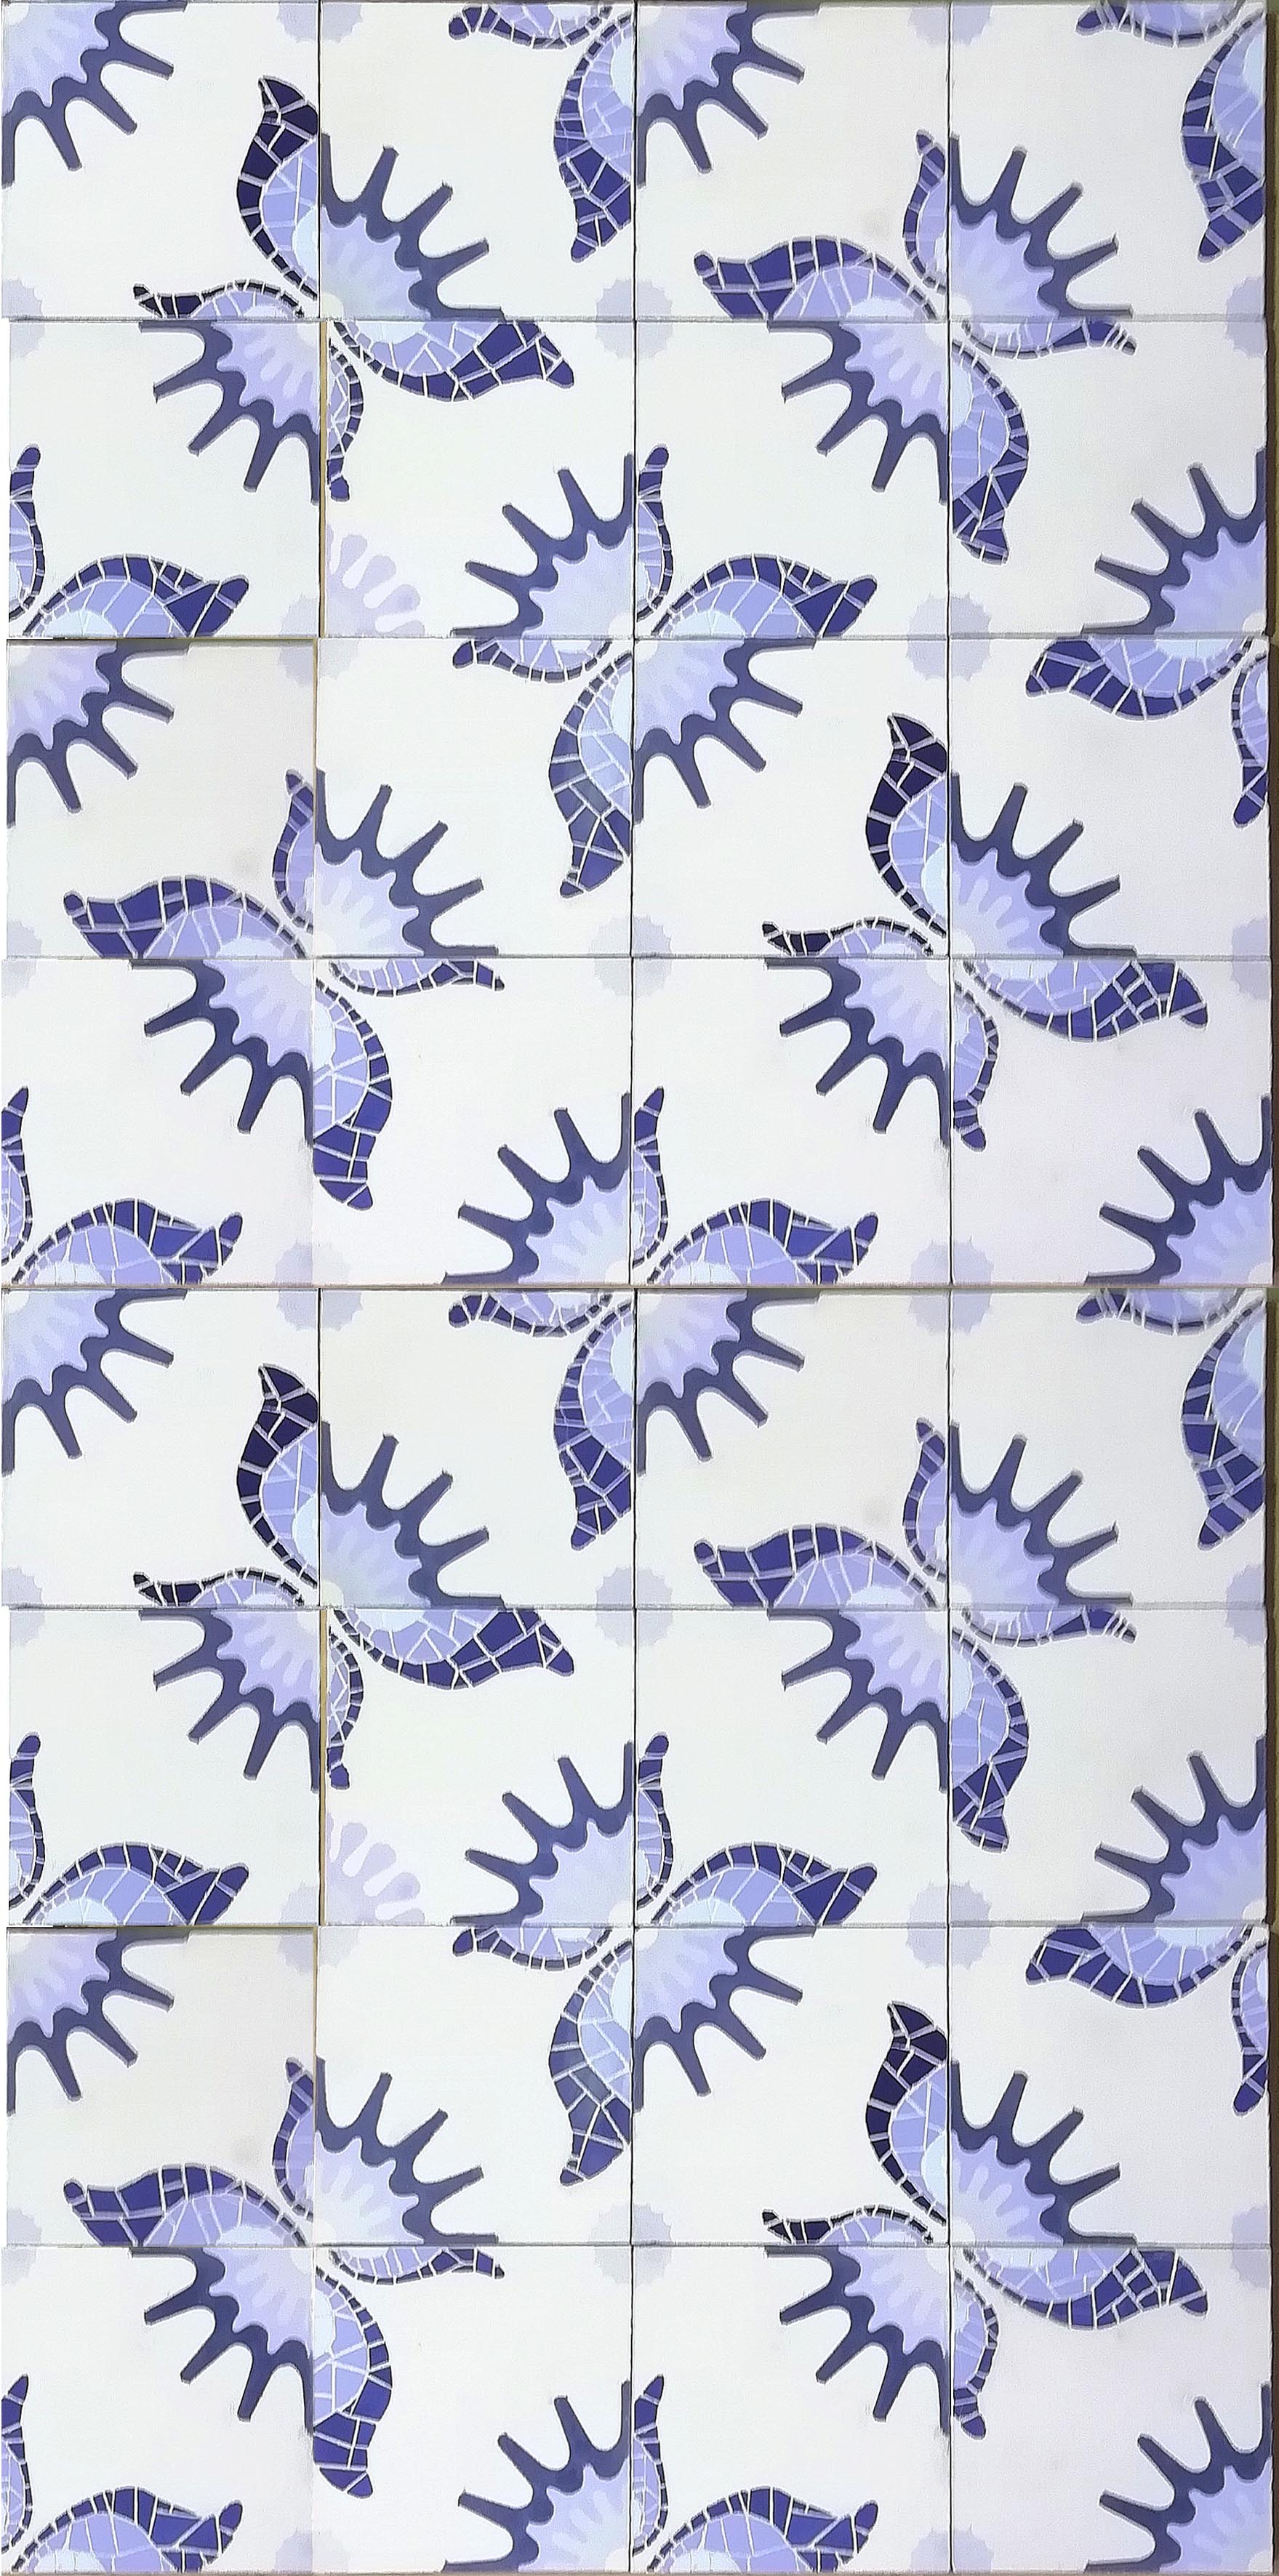 Trencadis Cement Tile by Gal Hart - Creative Work